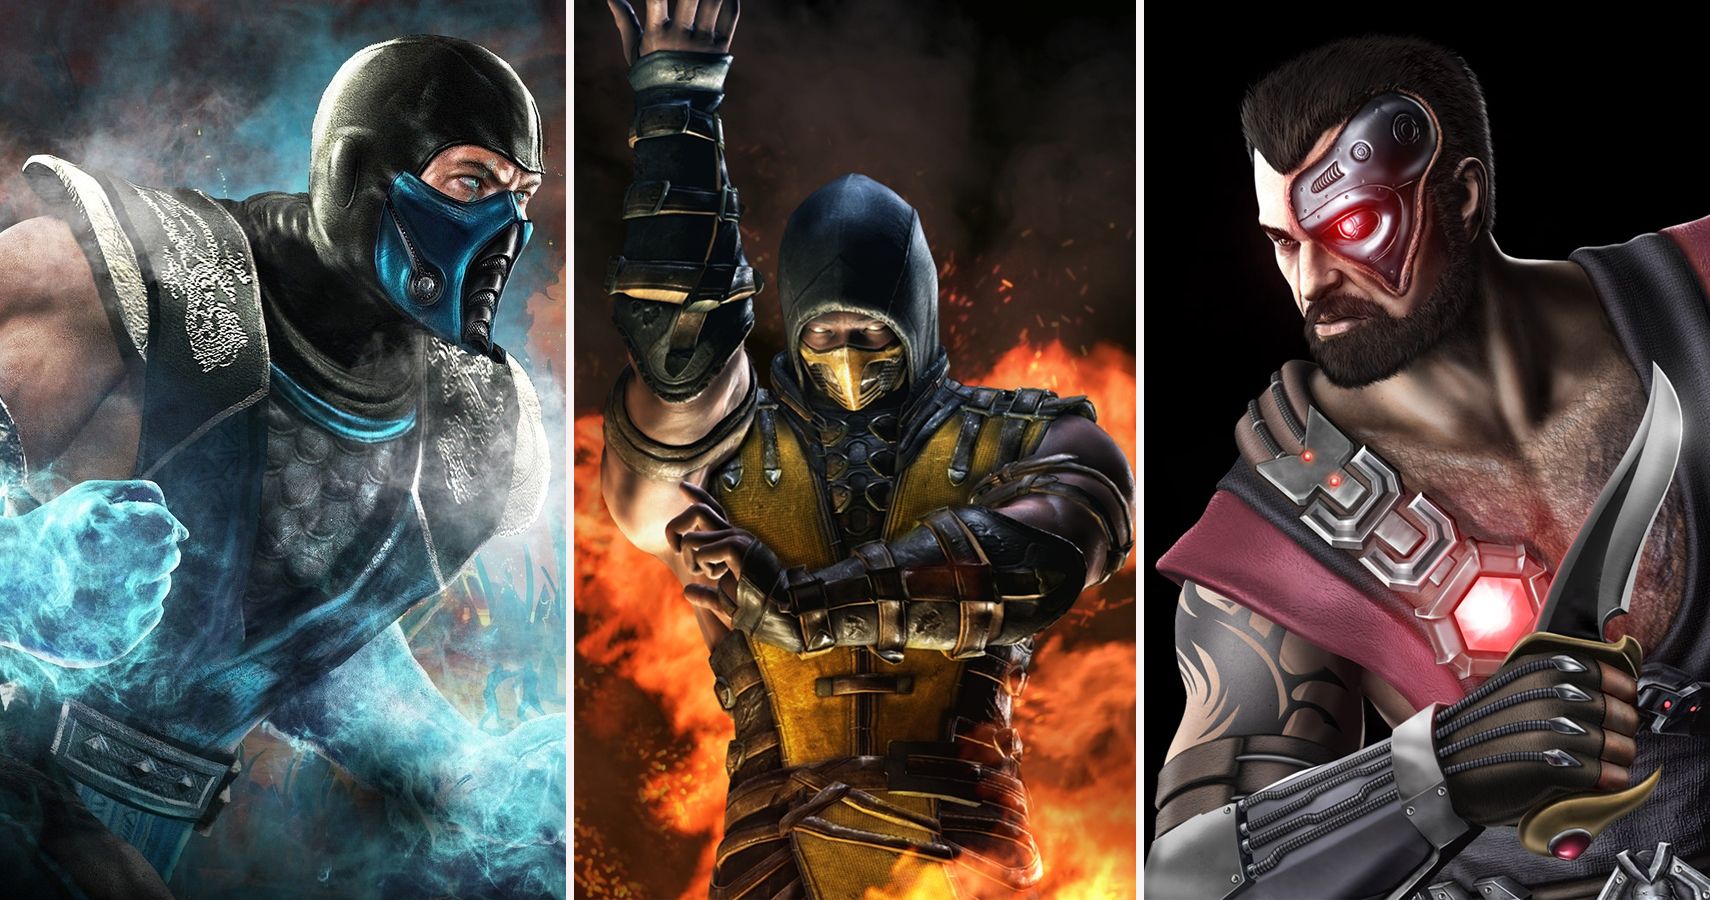 Every Mortal Kombat Movie Ranked From Worst To Best